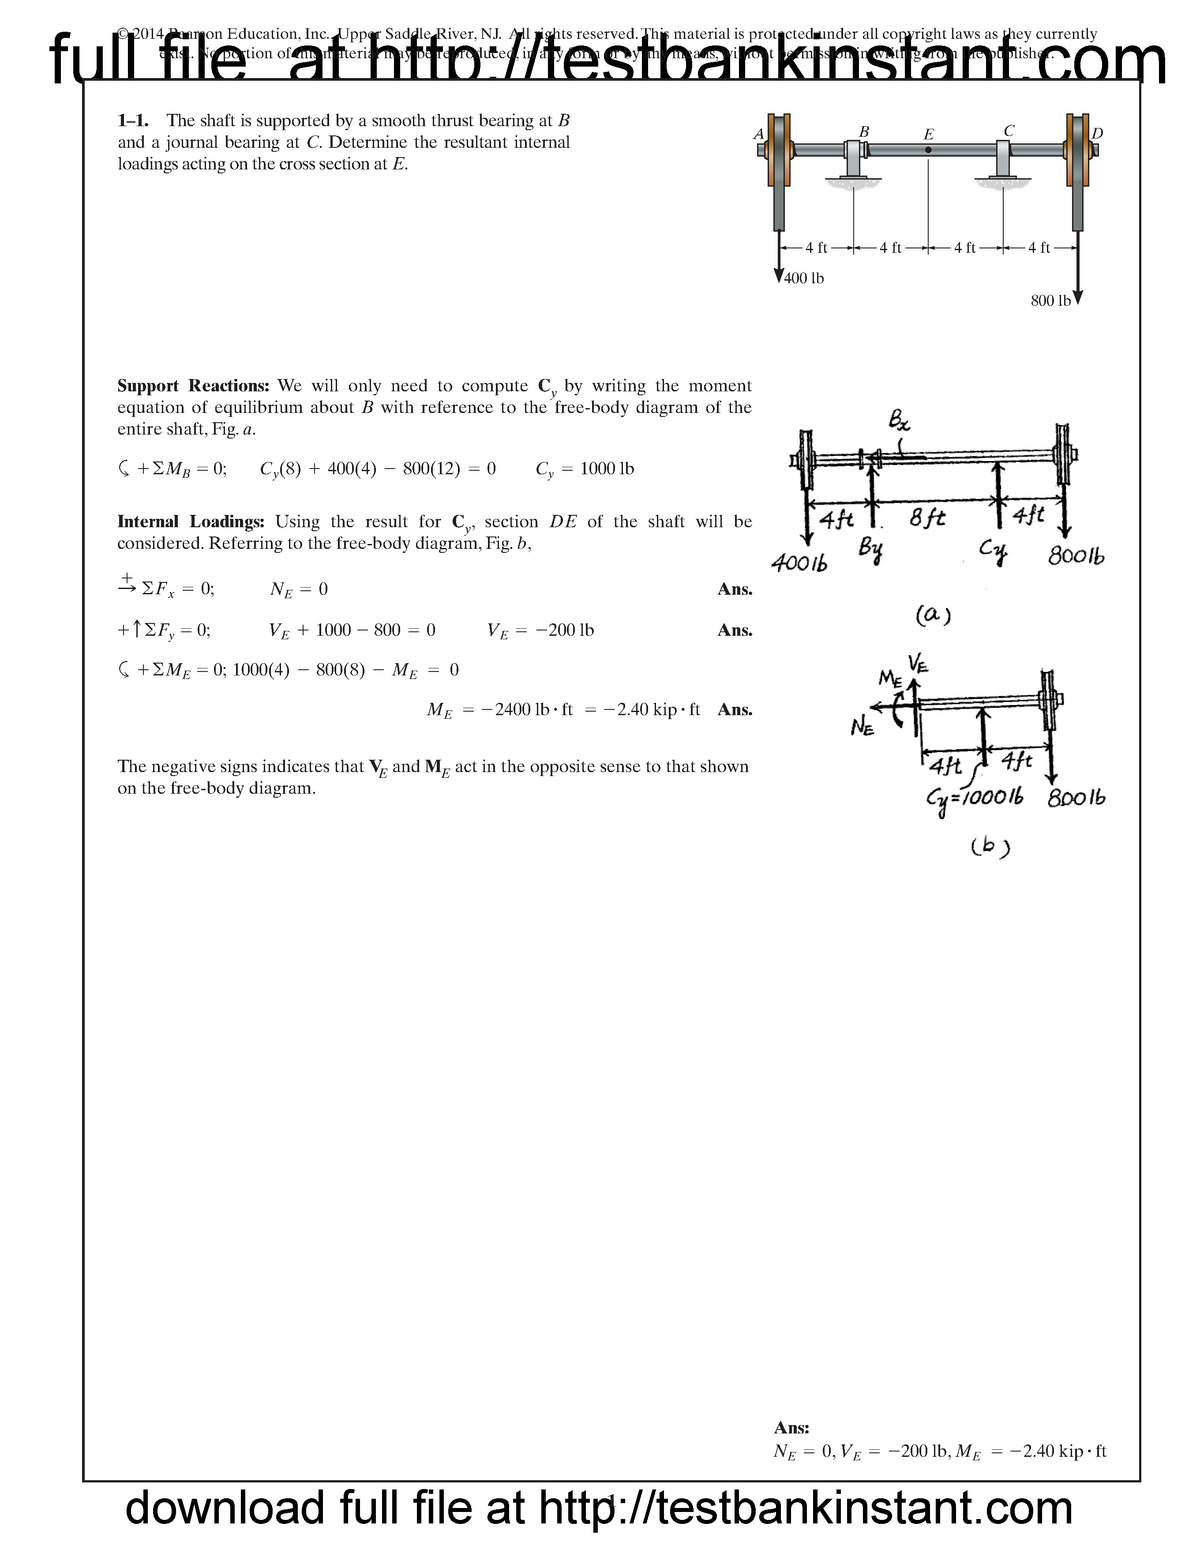 Voorzien Rommelig Eik Solution Manual for Mechanics of Materials 9th Edition by Hibbeler - full  file at testbankinstant 1 - Studocu